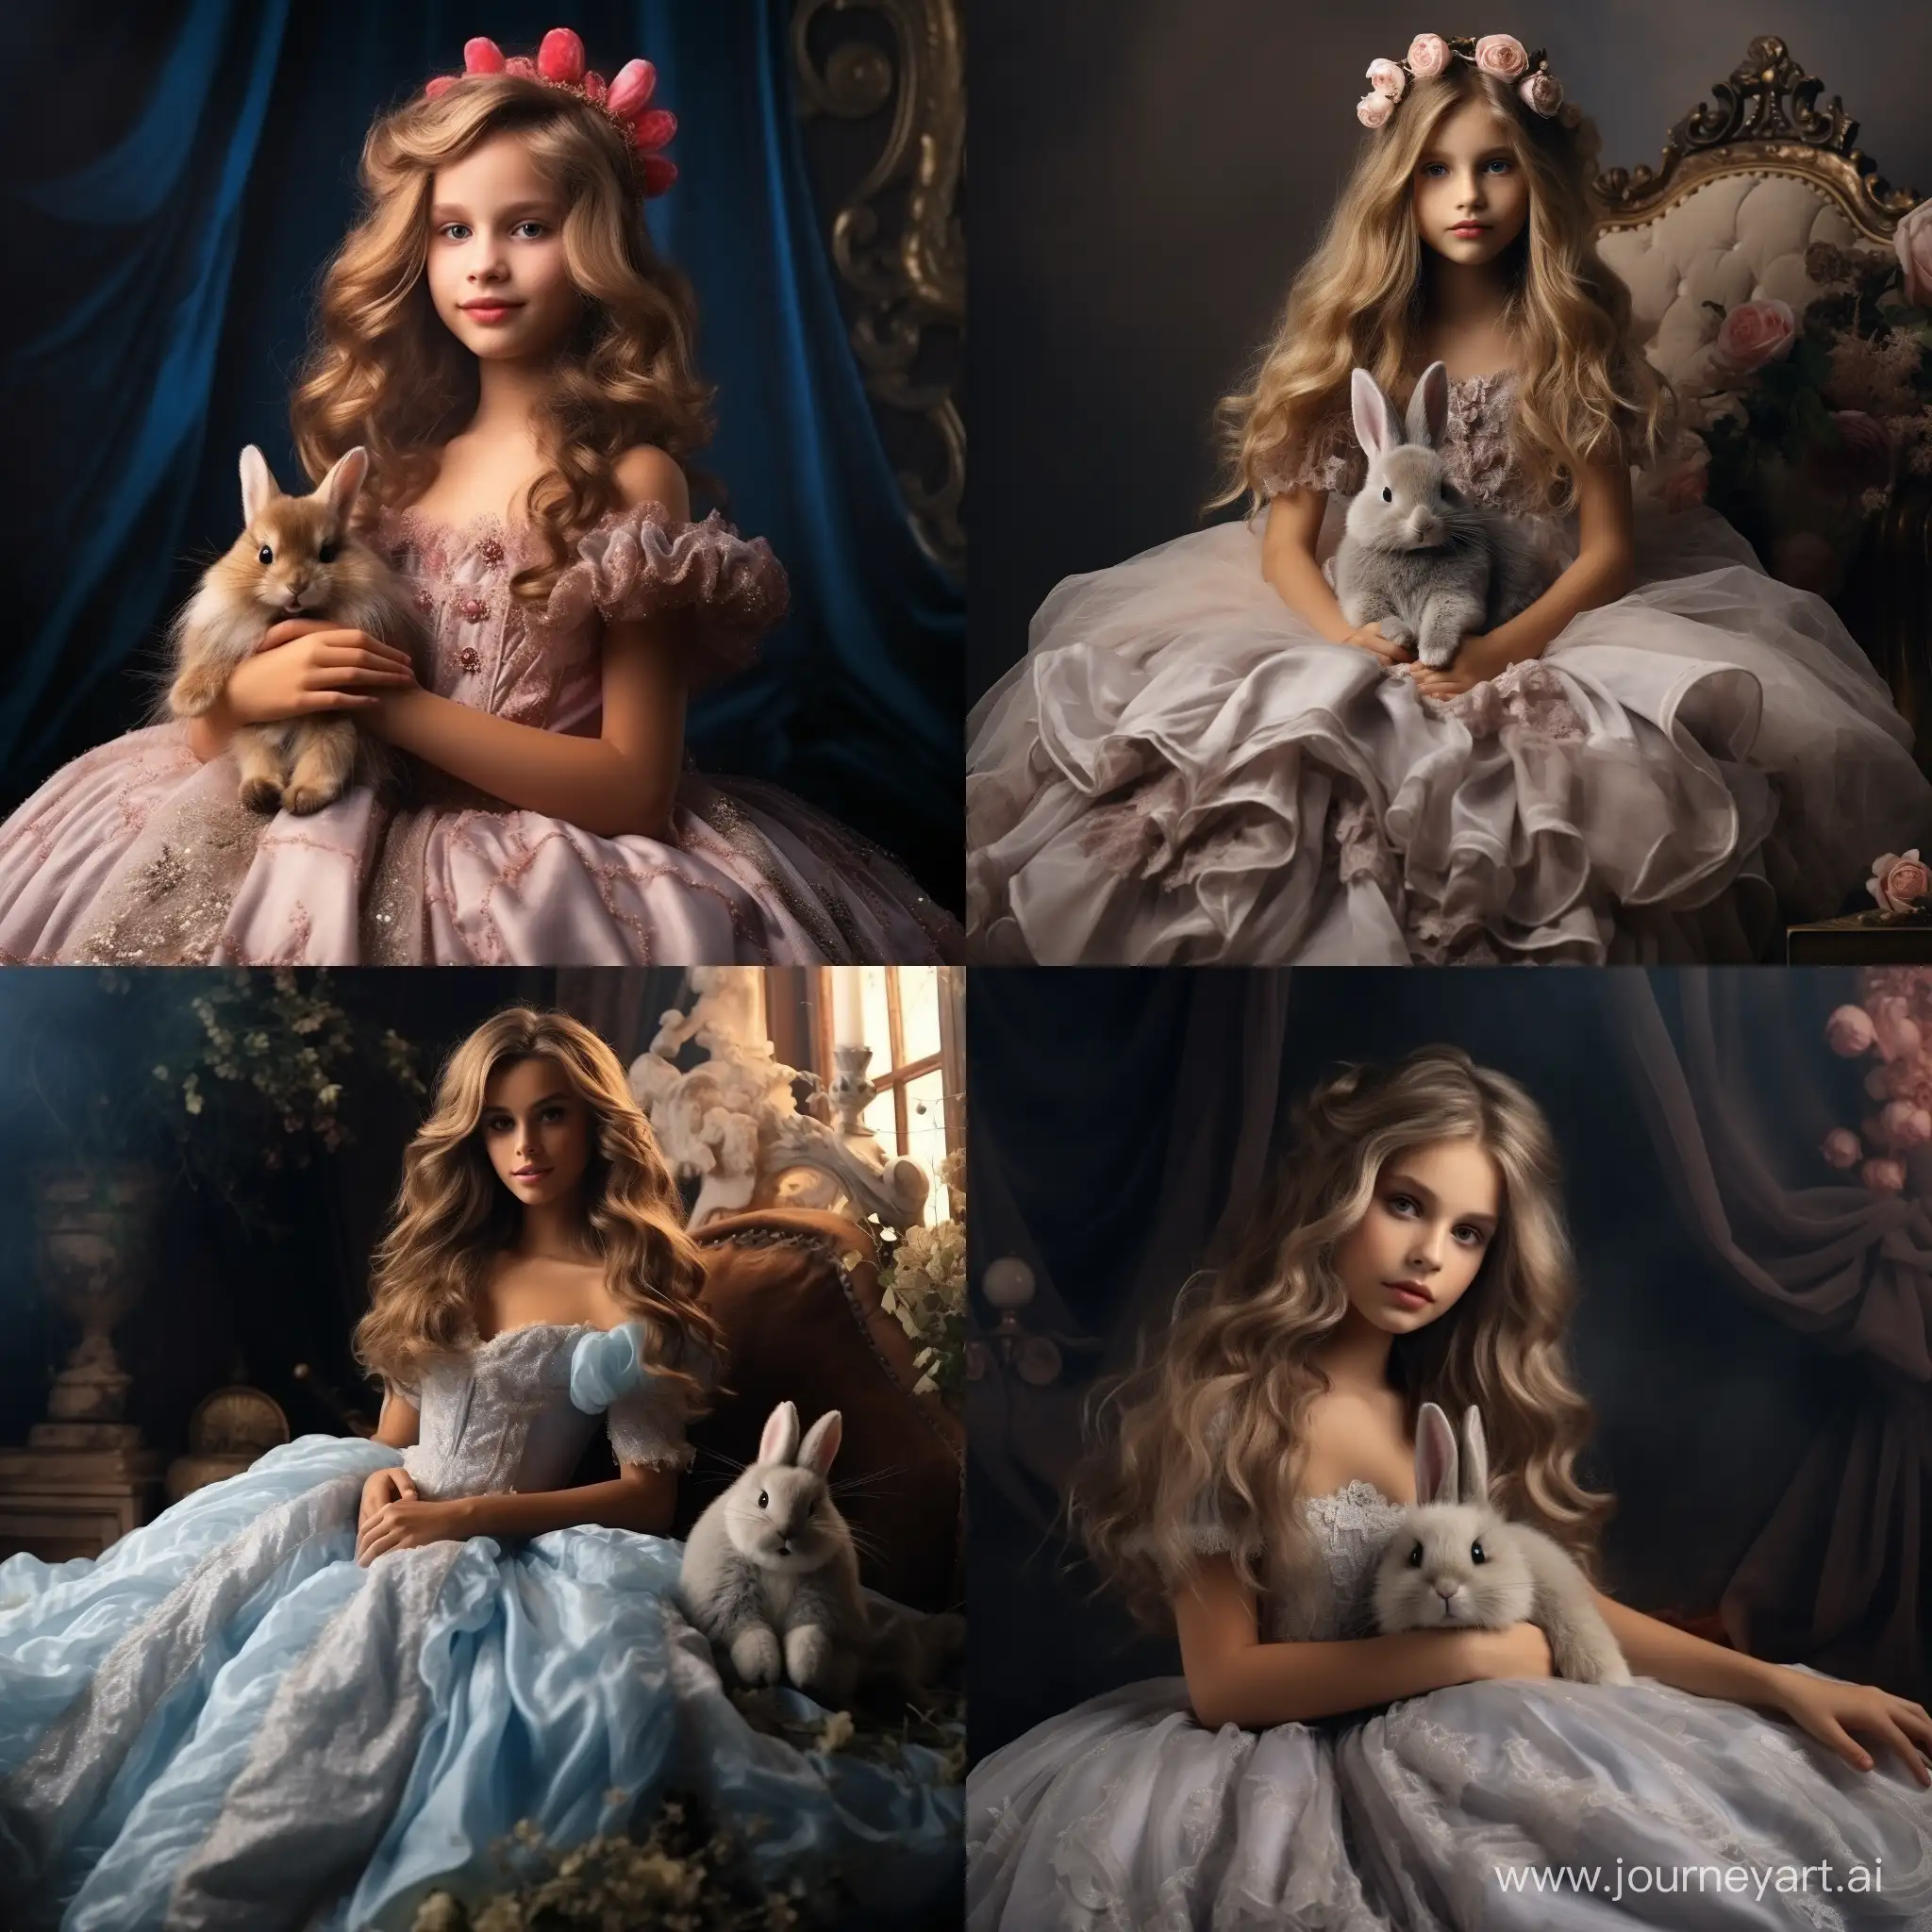 Enchanting-Princess-in-Elegant-Ball-Gown-with-Playful-Rabbit